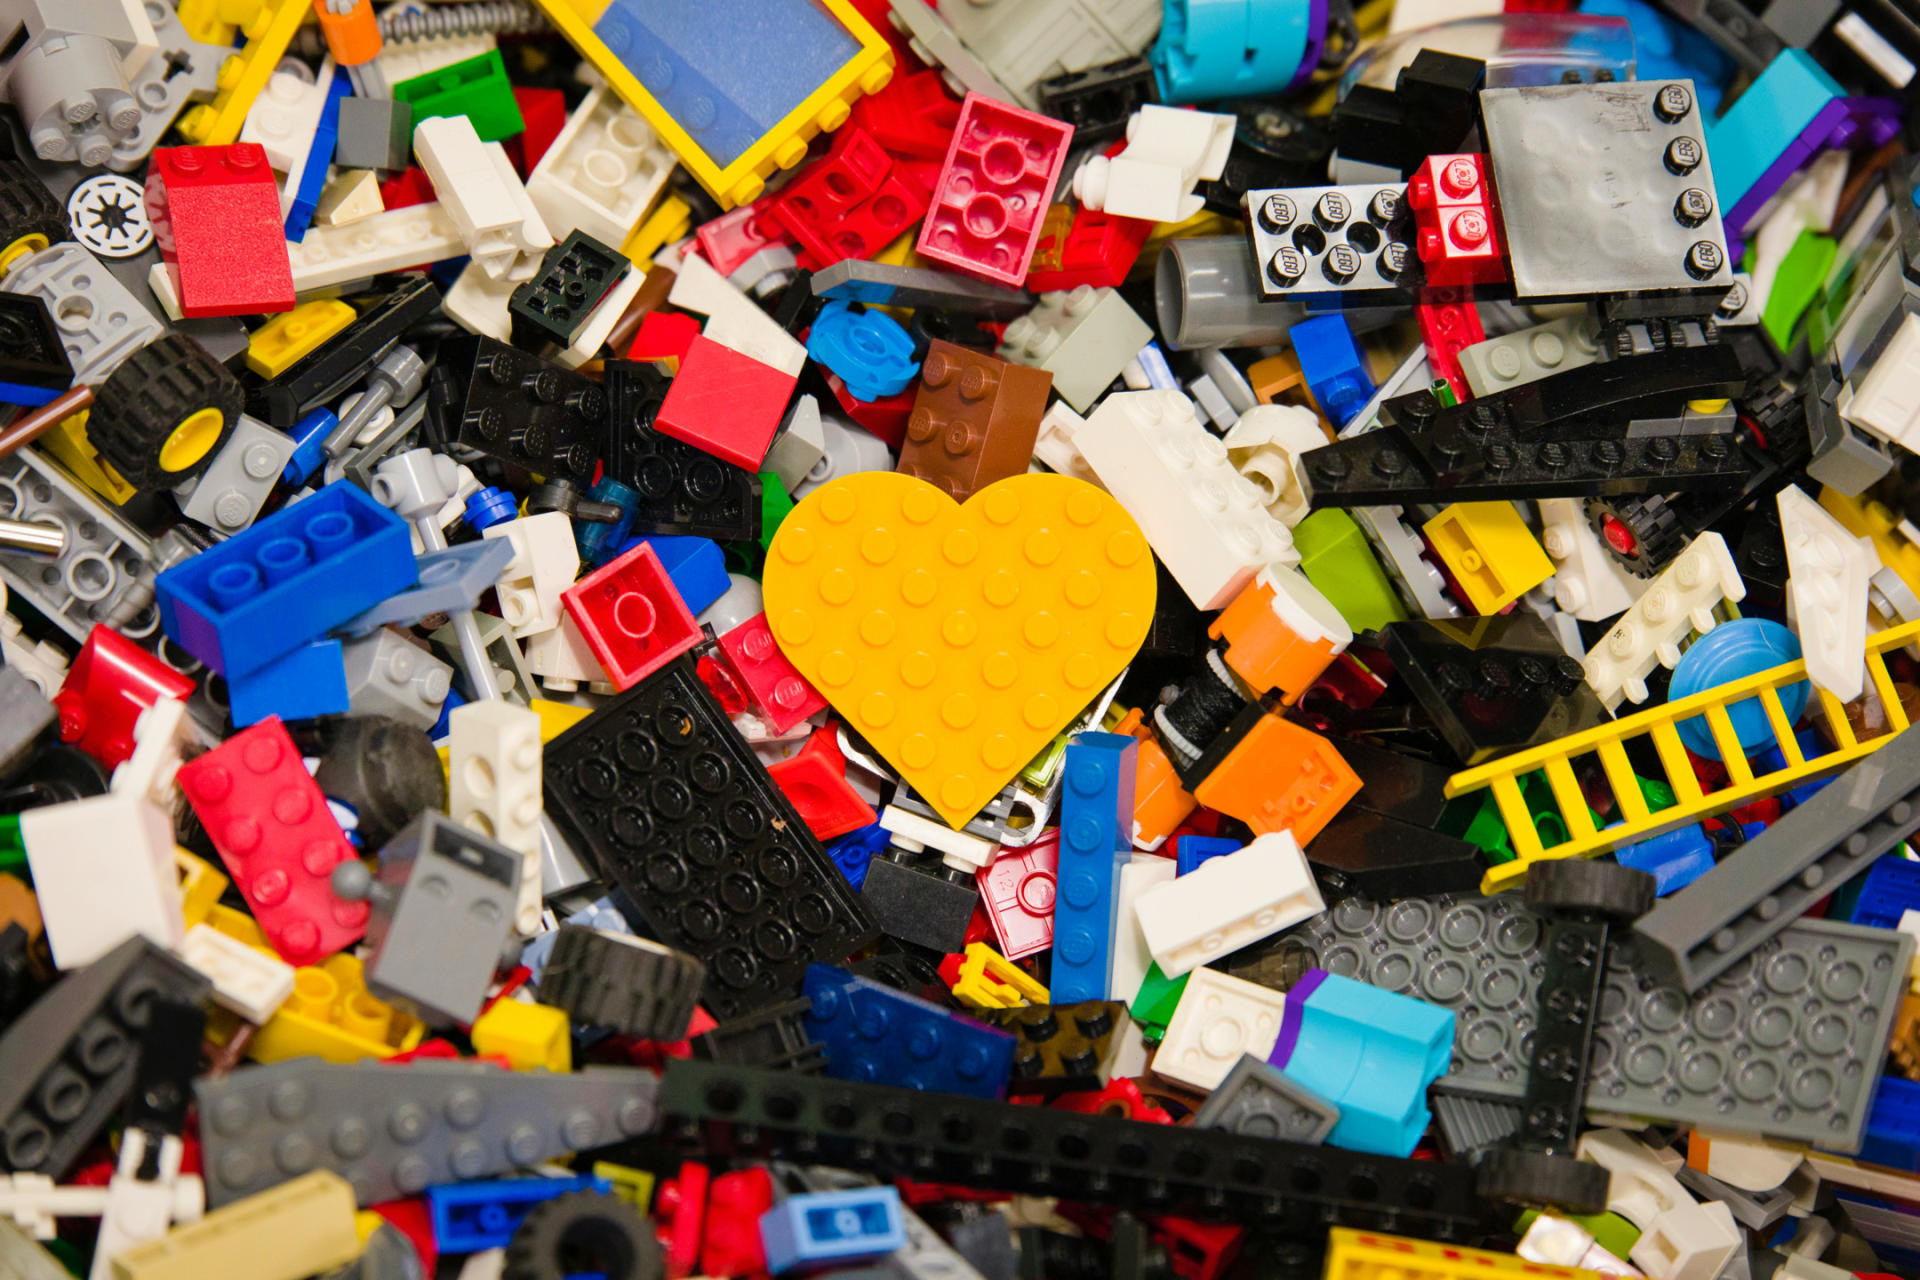 A heart-shaped Lego brick among a number of different Lego bricks